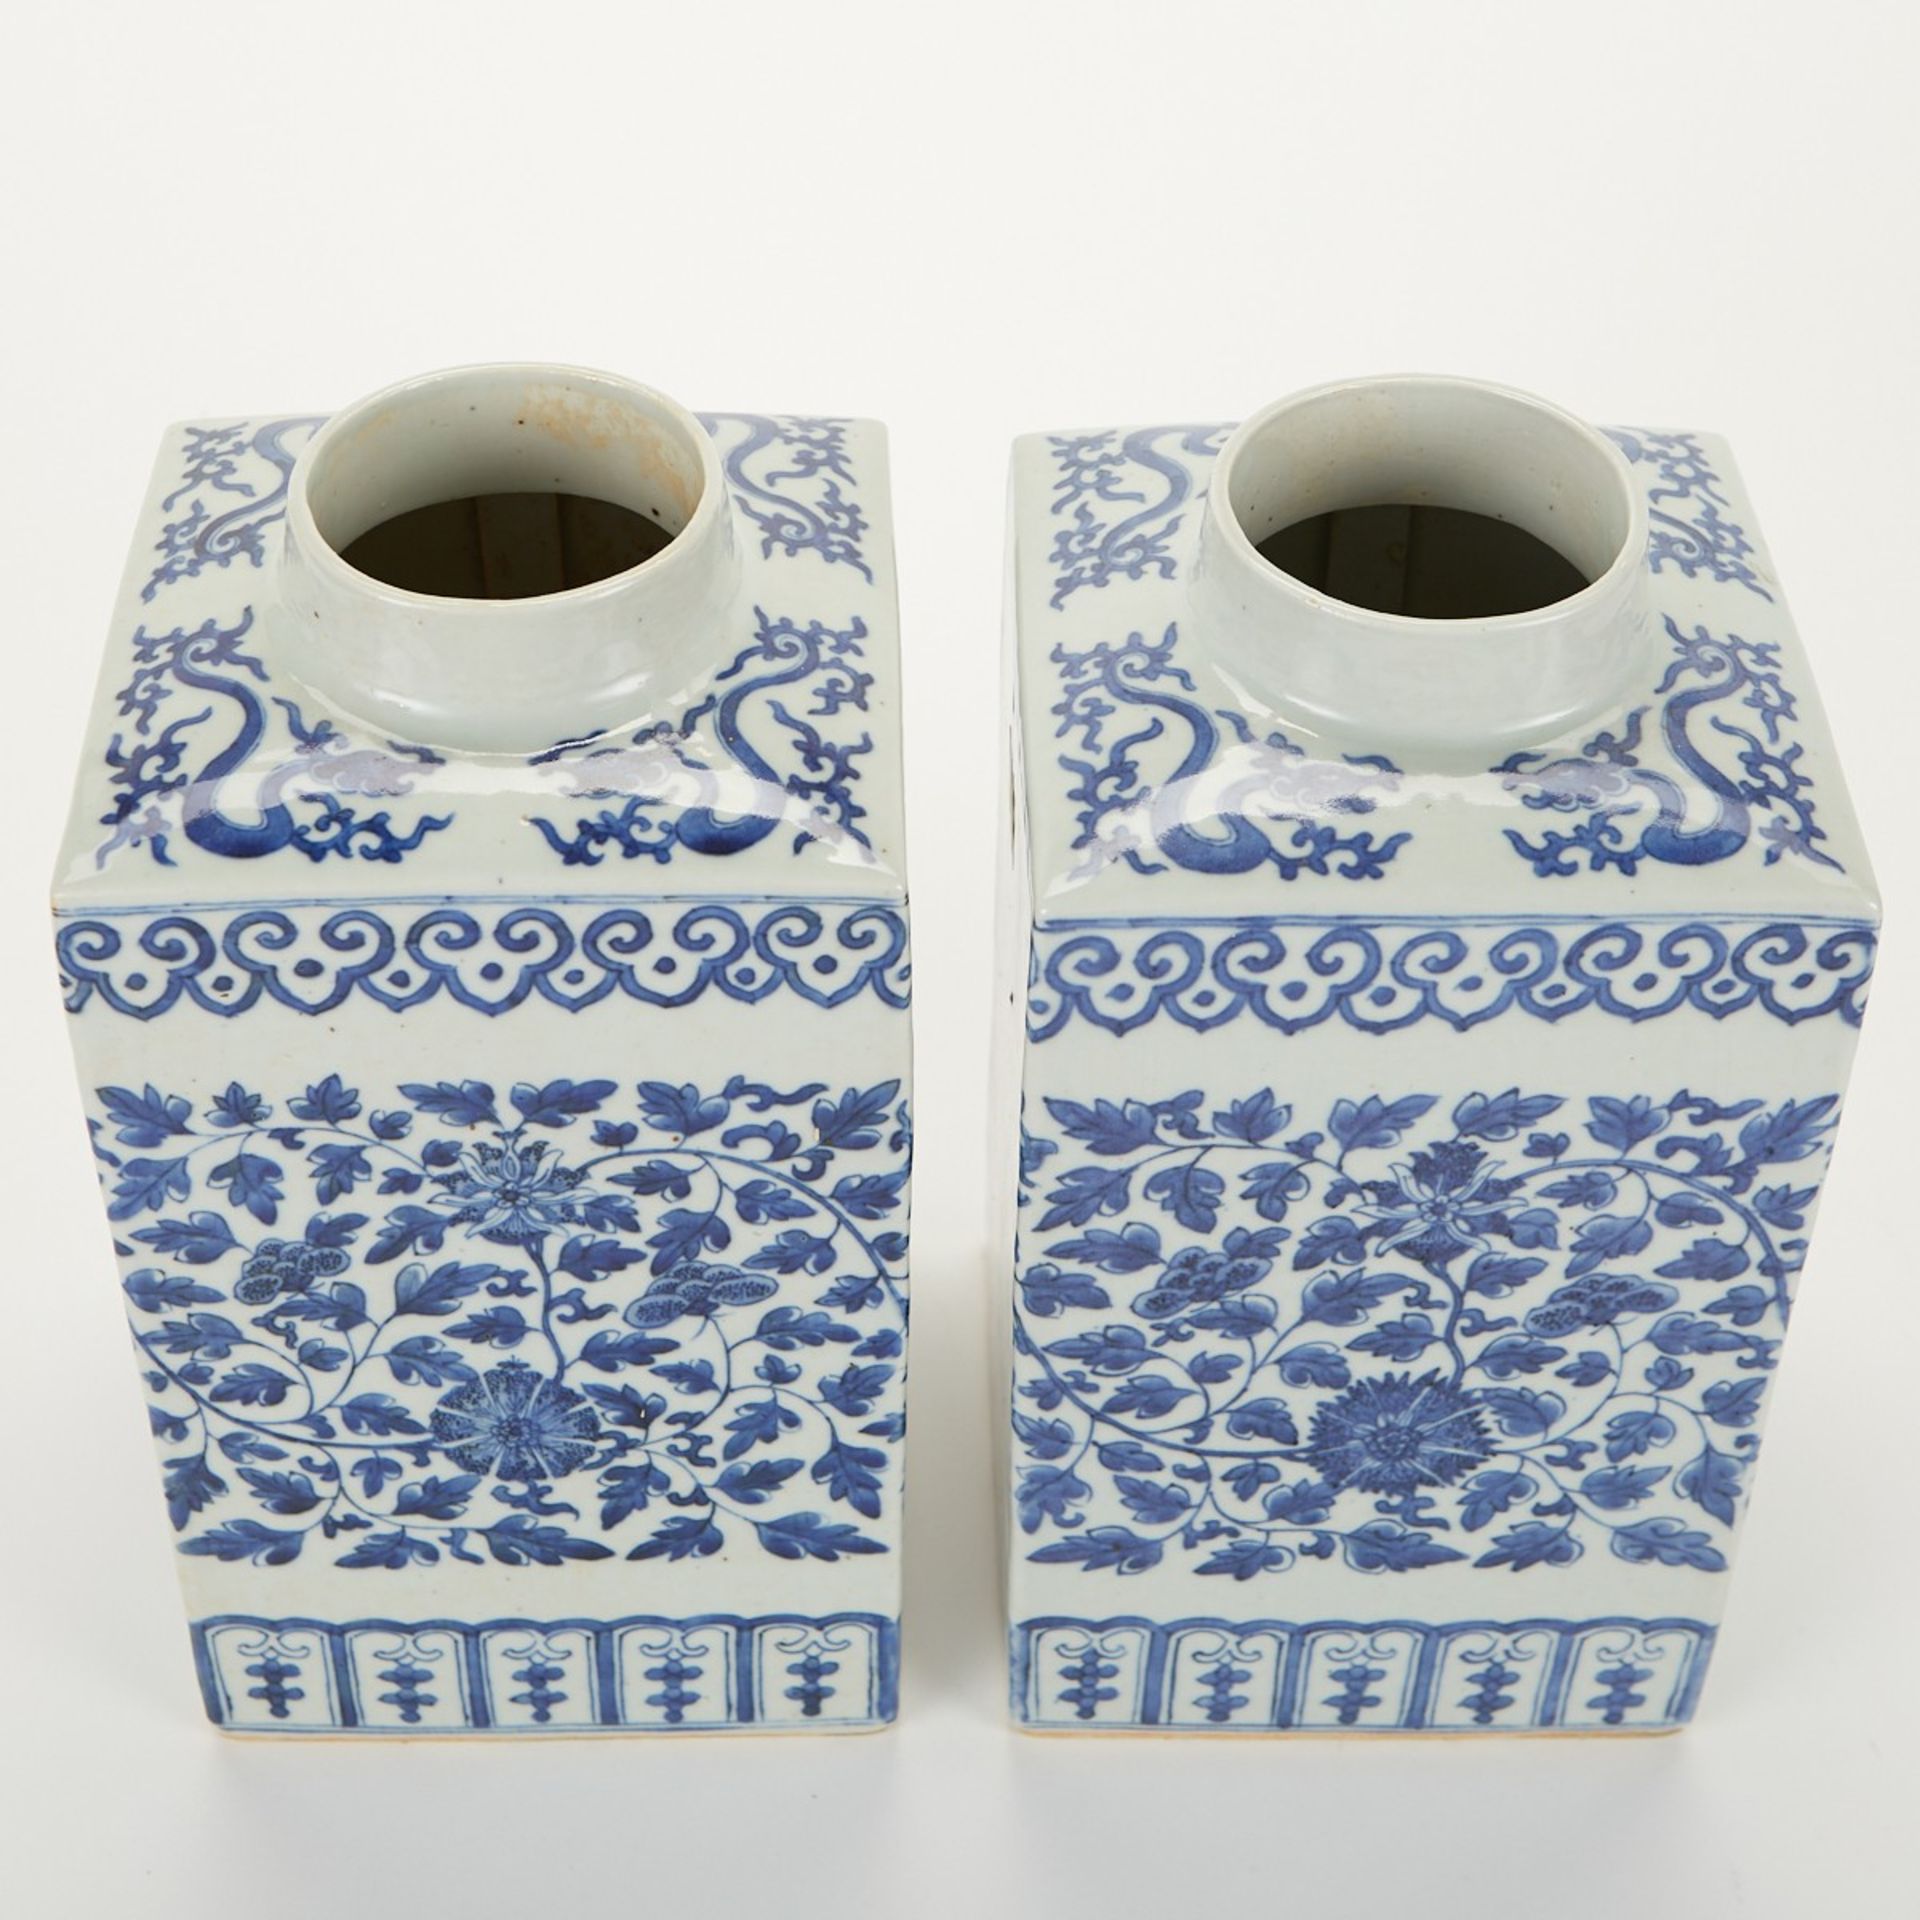 Pair of Chinese Export Blue & White Porcelain Ginger Jars - Image 6 of 9